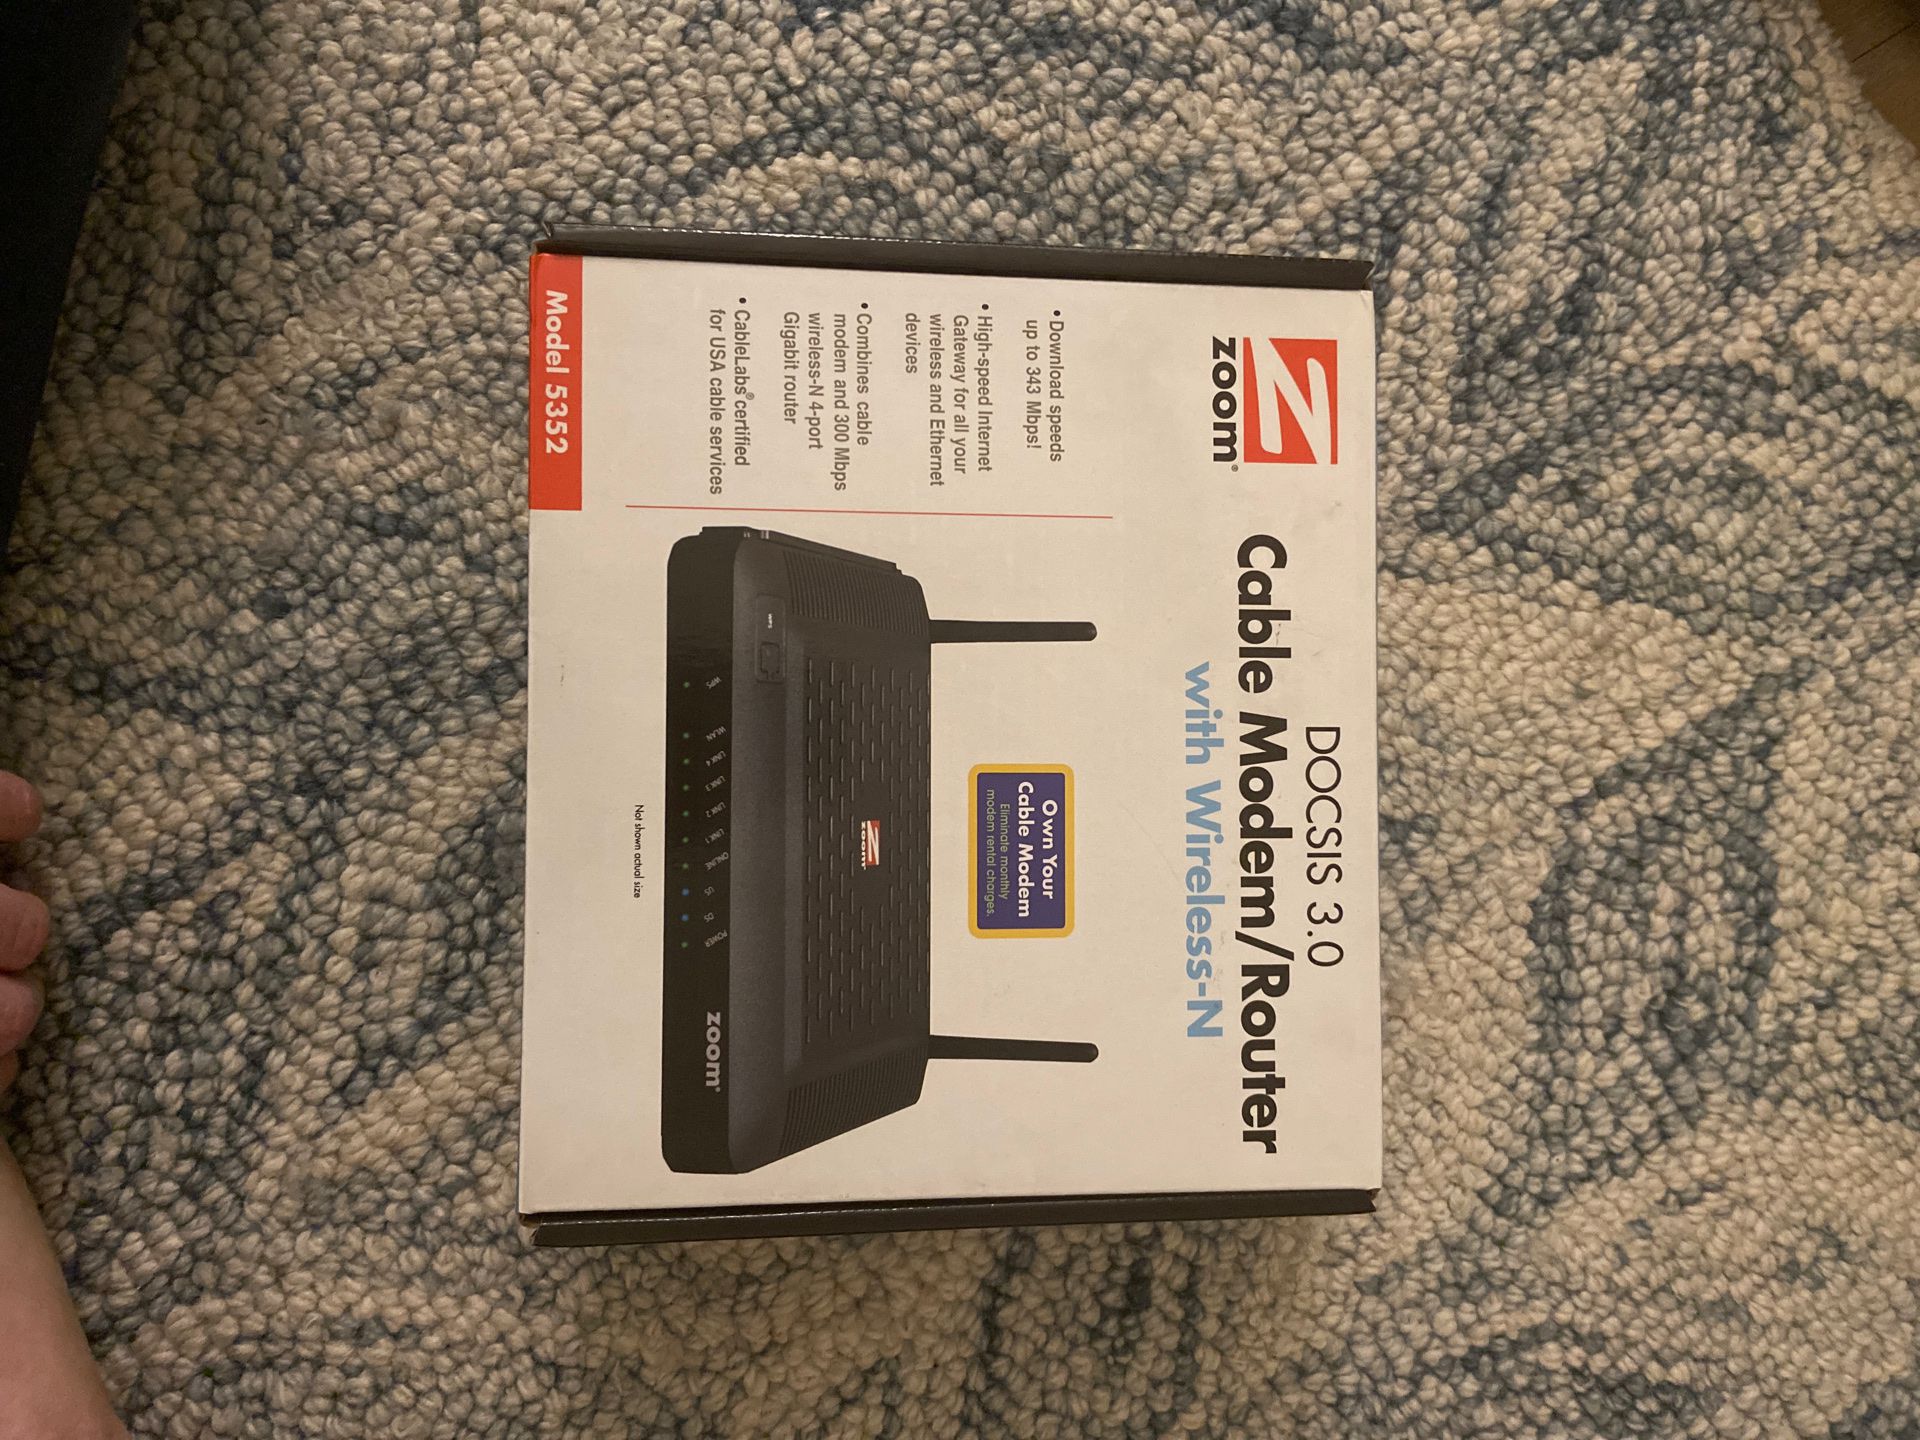 Zoom cable modem / router